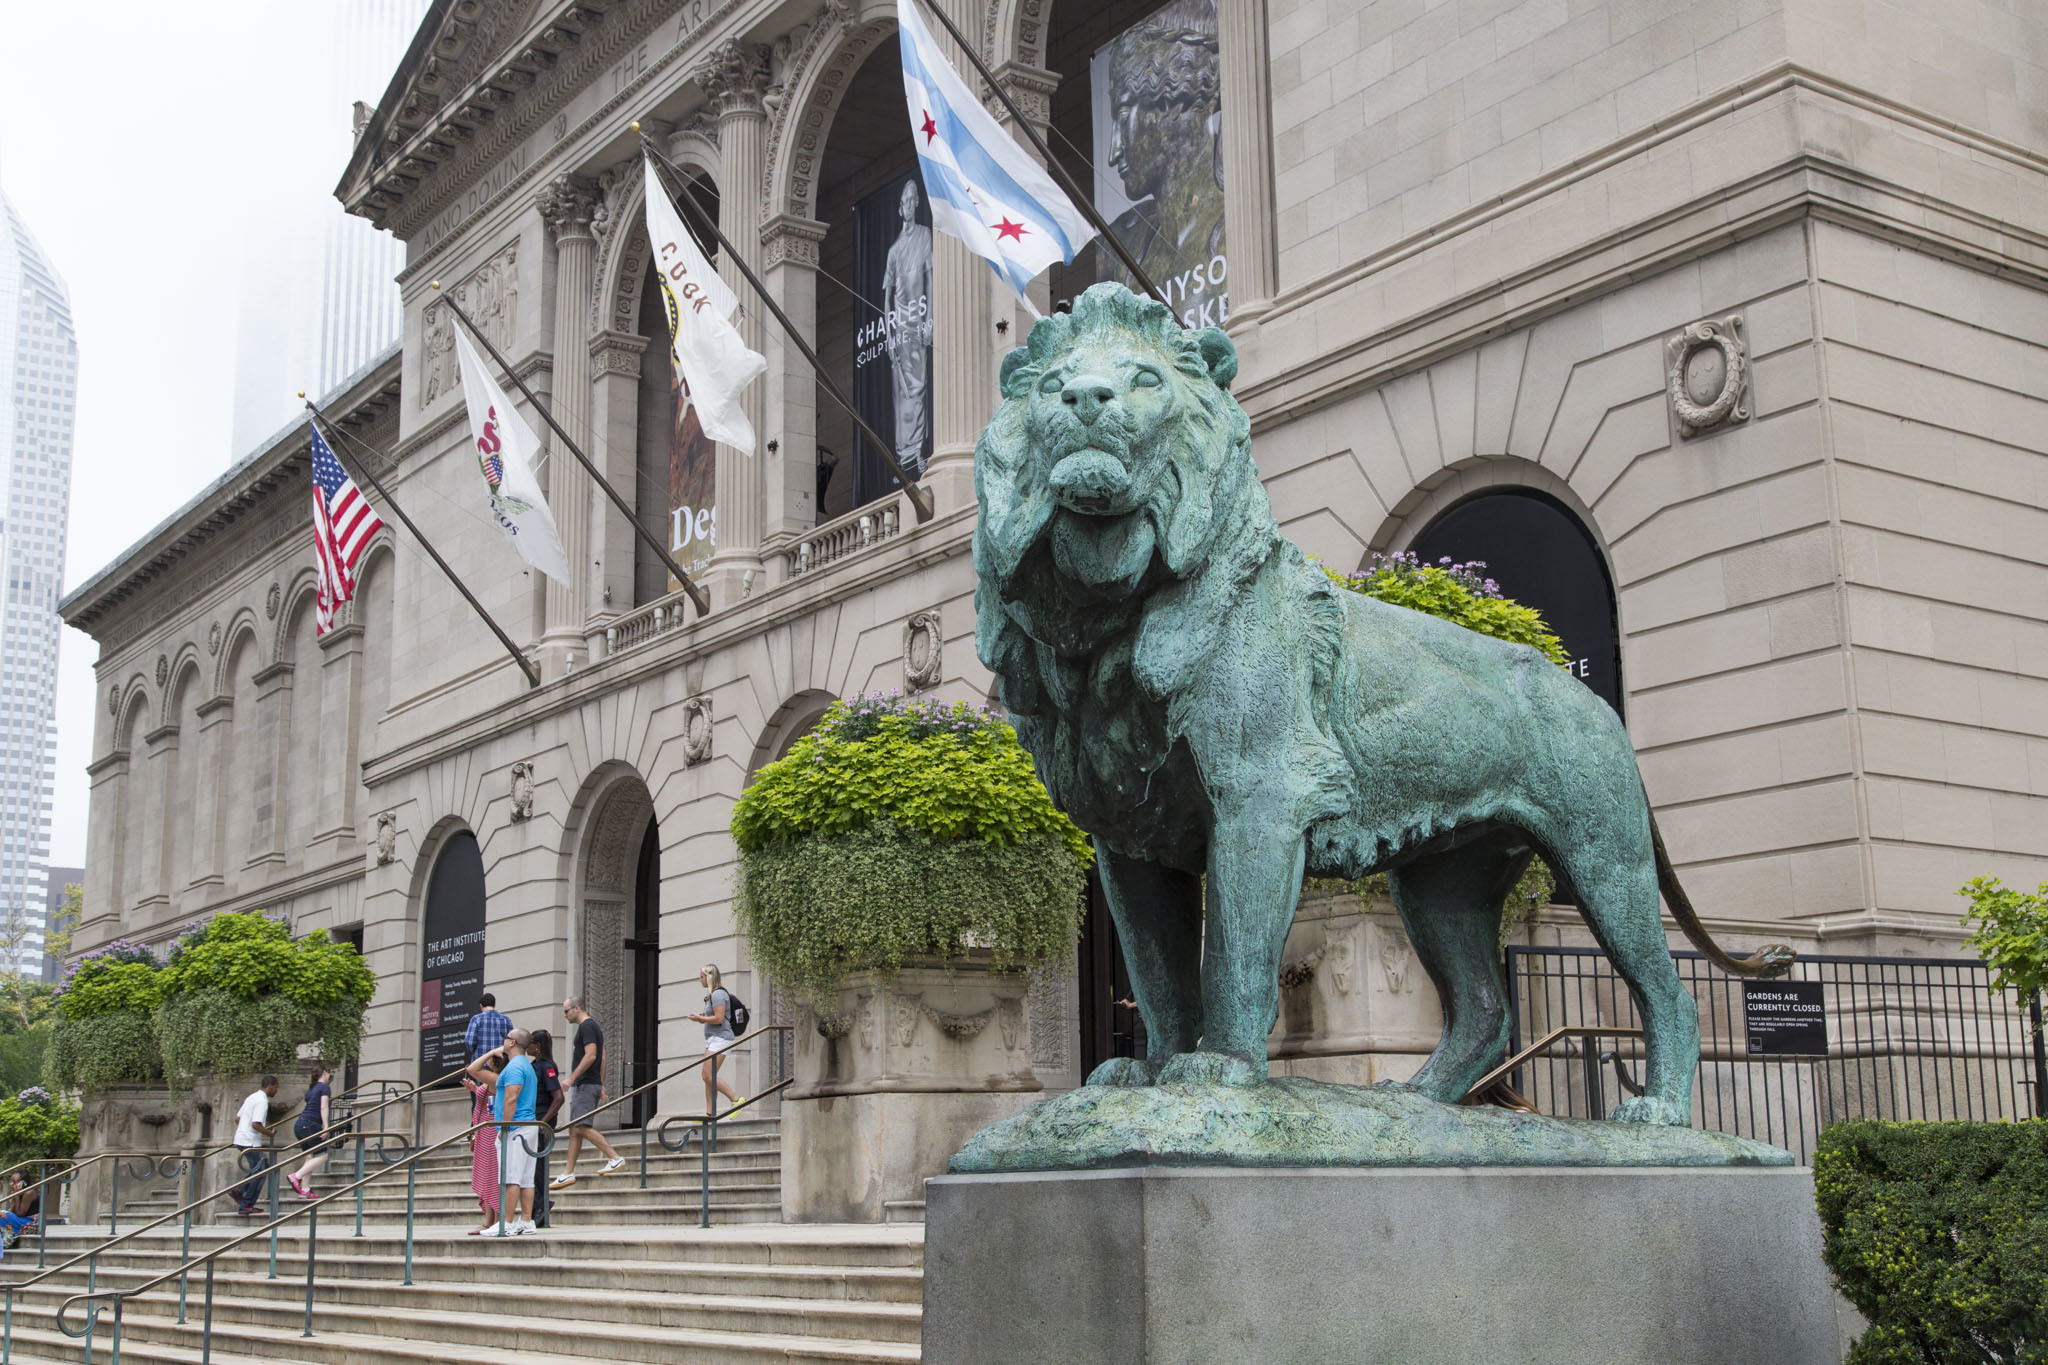 Free Admission Days at The Art Institute